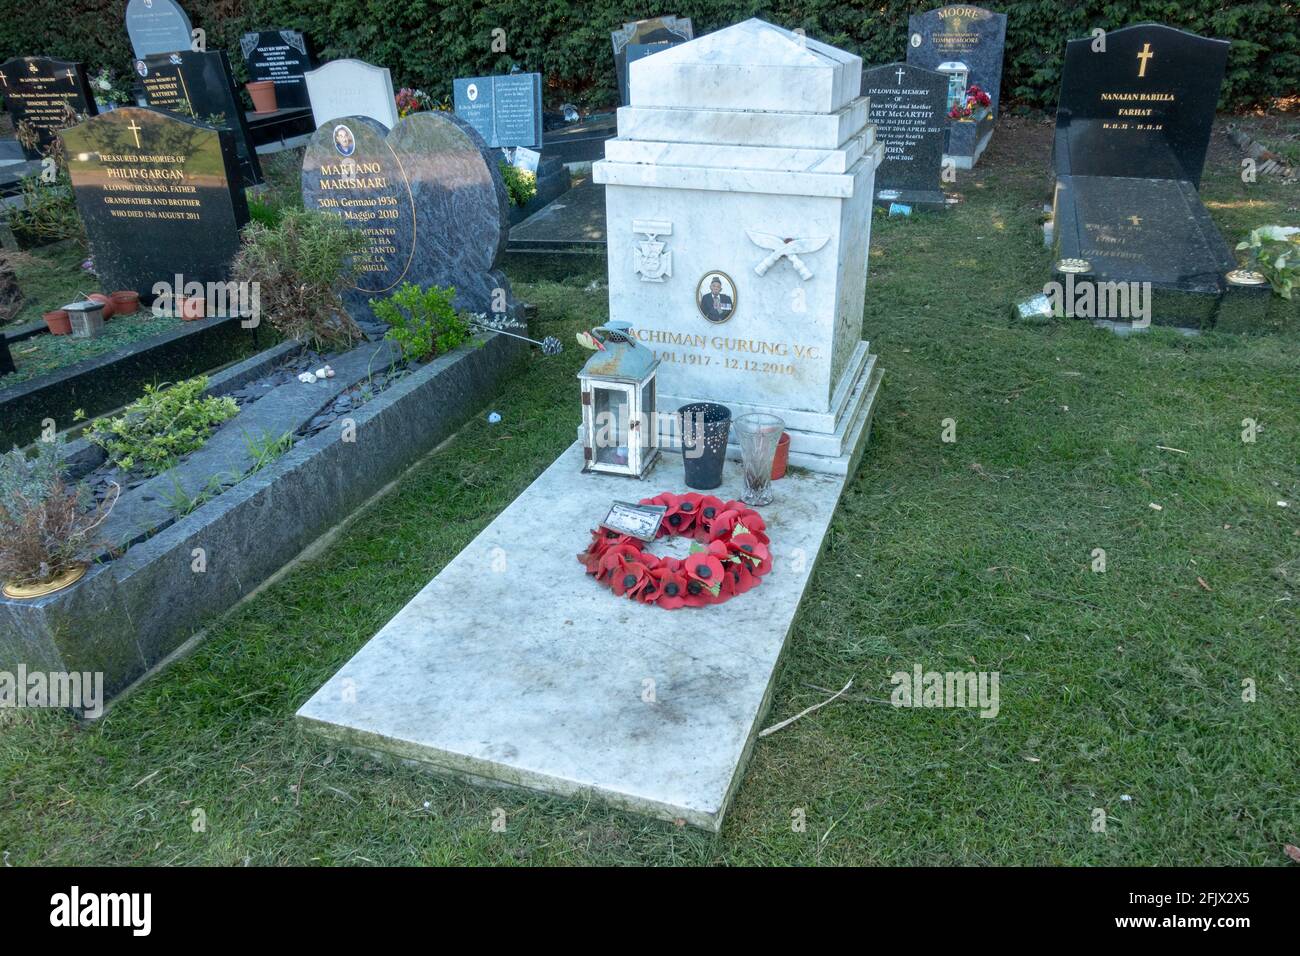 Grave of Sgt Lachhiman Gurung VC, a WWII veteran from Nepal, Chiswick Cemetery, Staveley Gardens, London, UK. Stock Photo